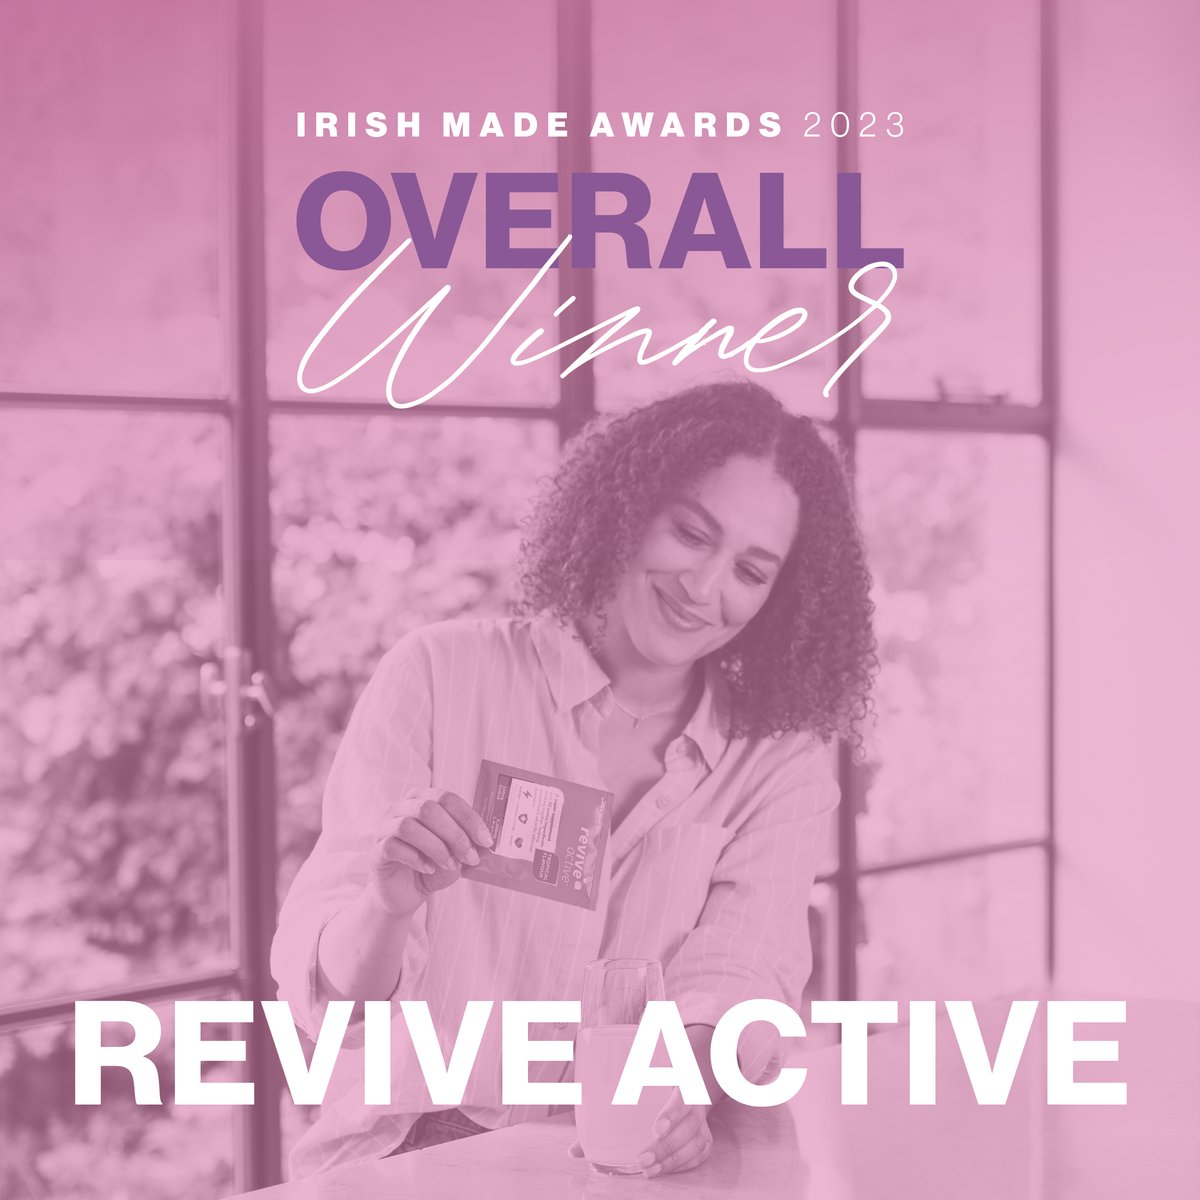 Another round of congratulations are in order for @reviveactive which has just scooped the Overall Winner Award at the Irish Made Awards 2023!

#irishmadeawards2023 #reviveactive #overallwinner